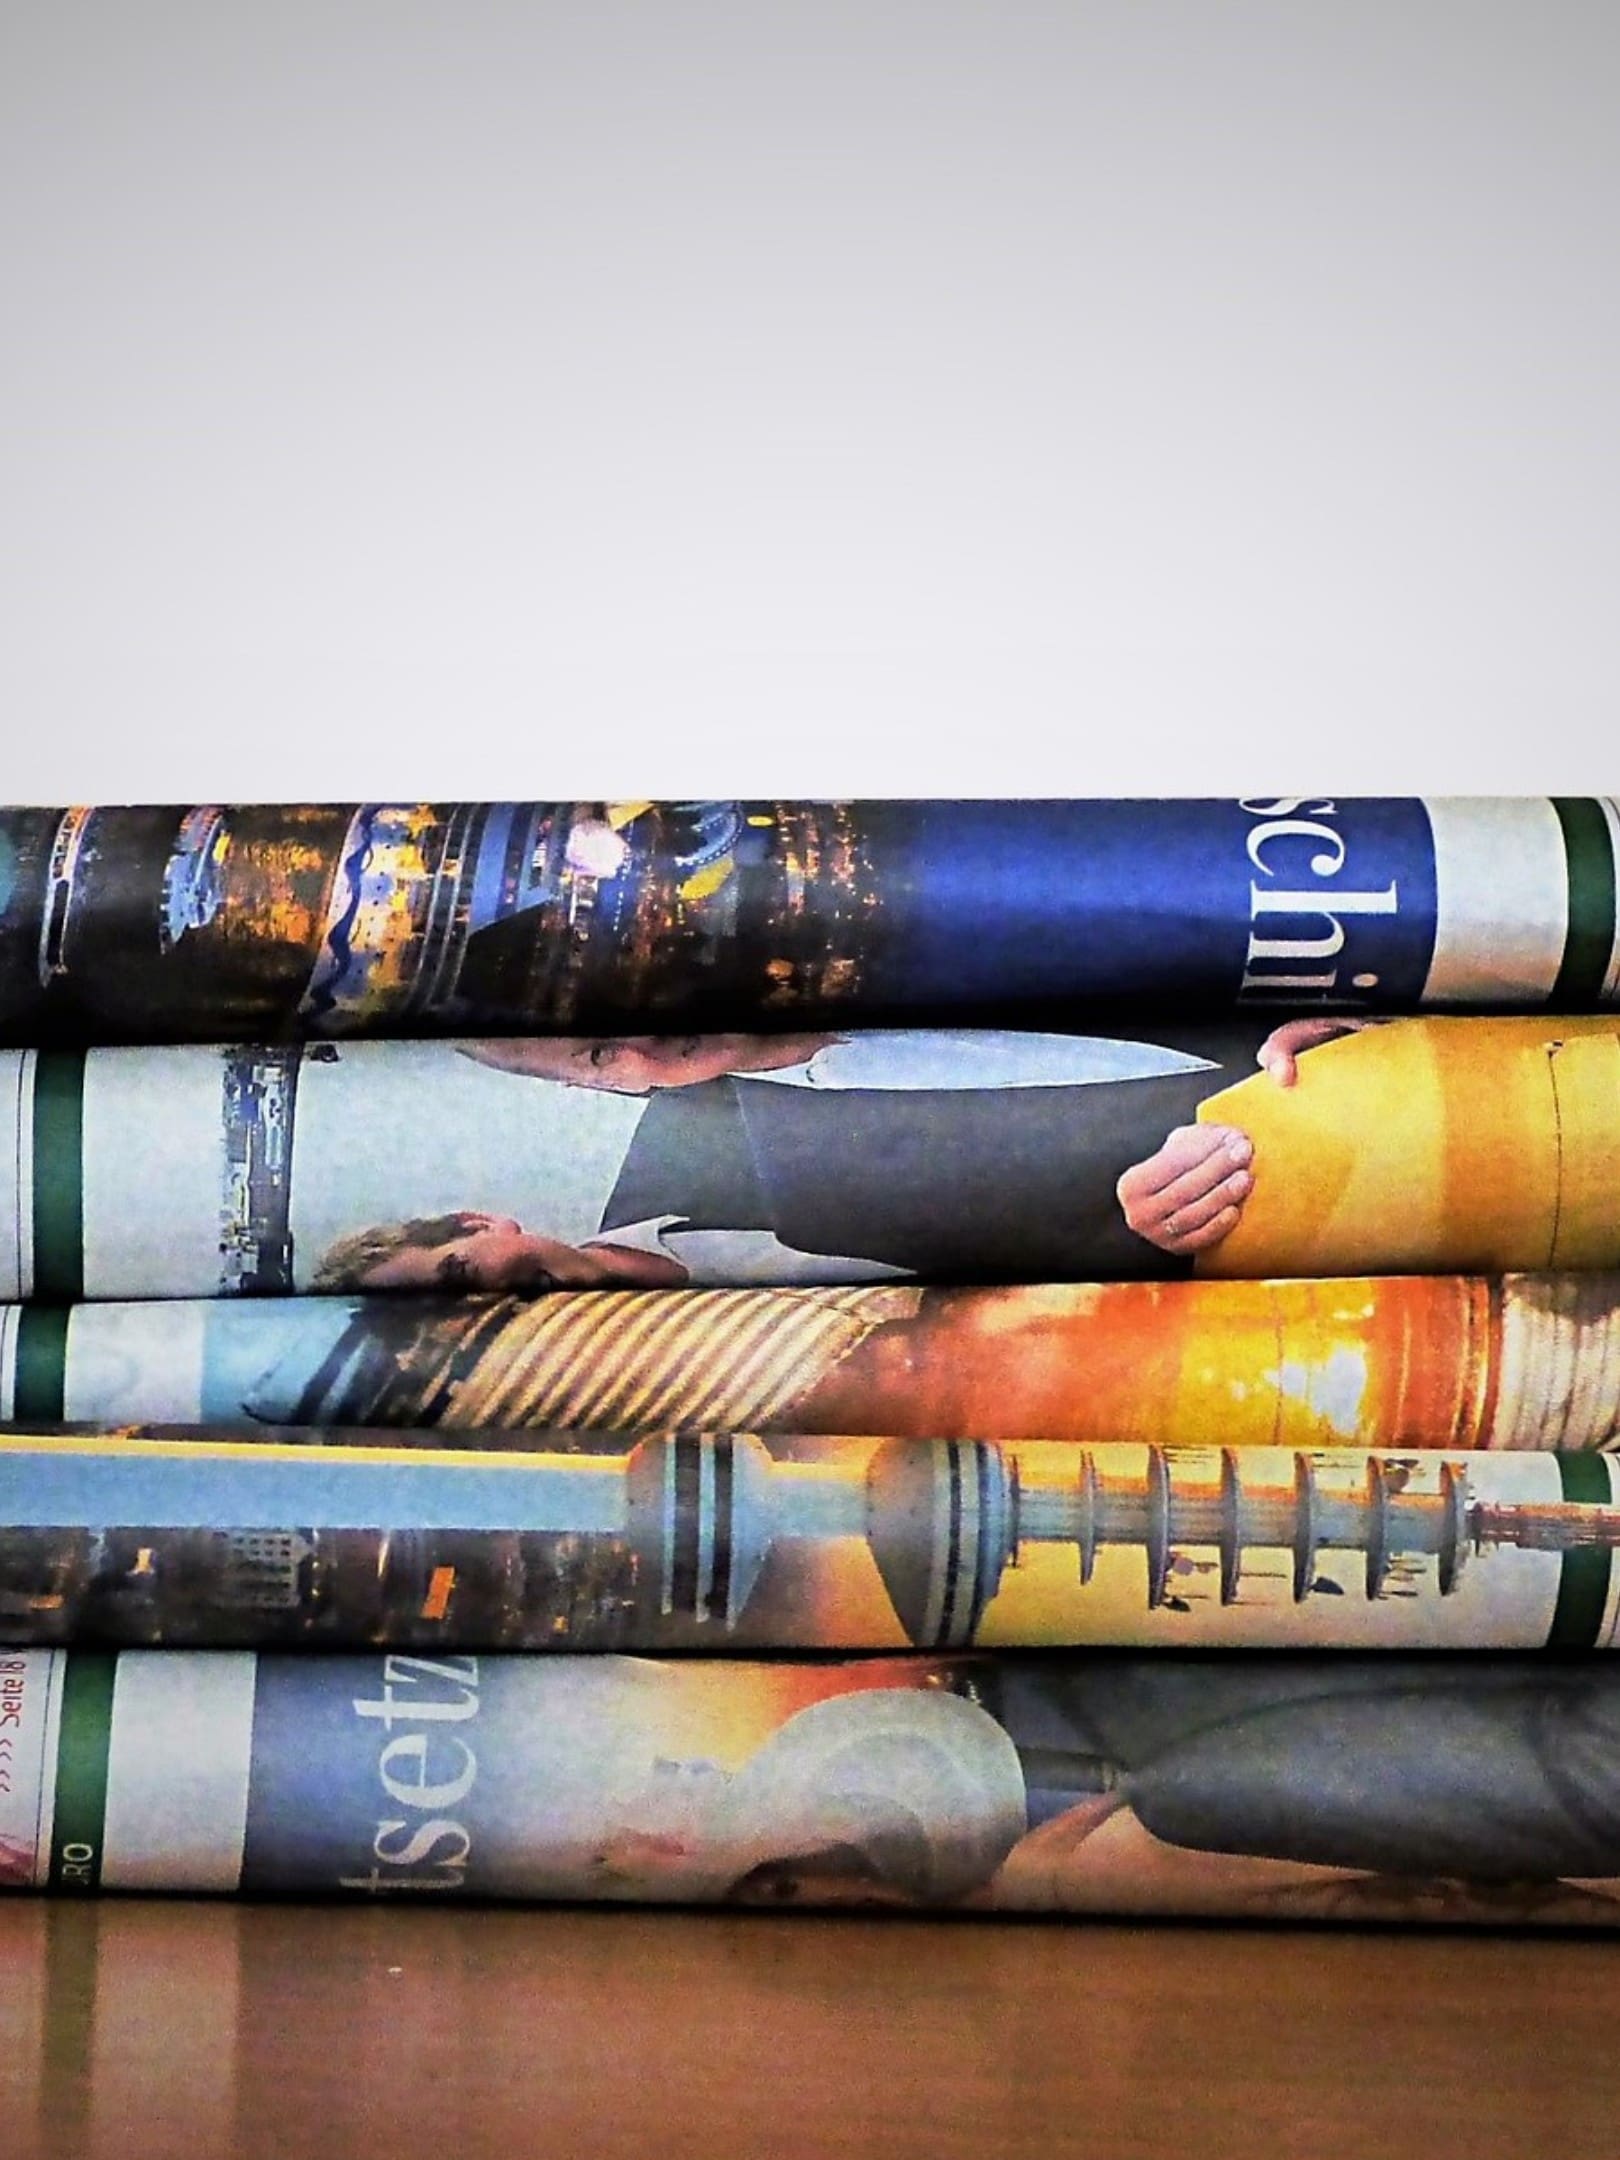 A stack of magazines with different covers on them.